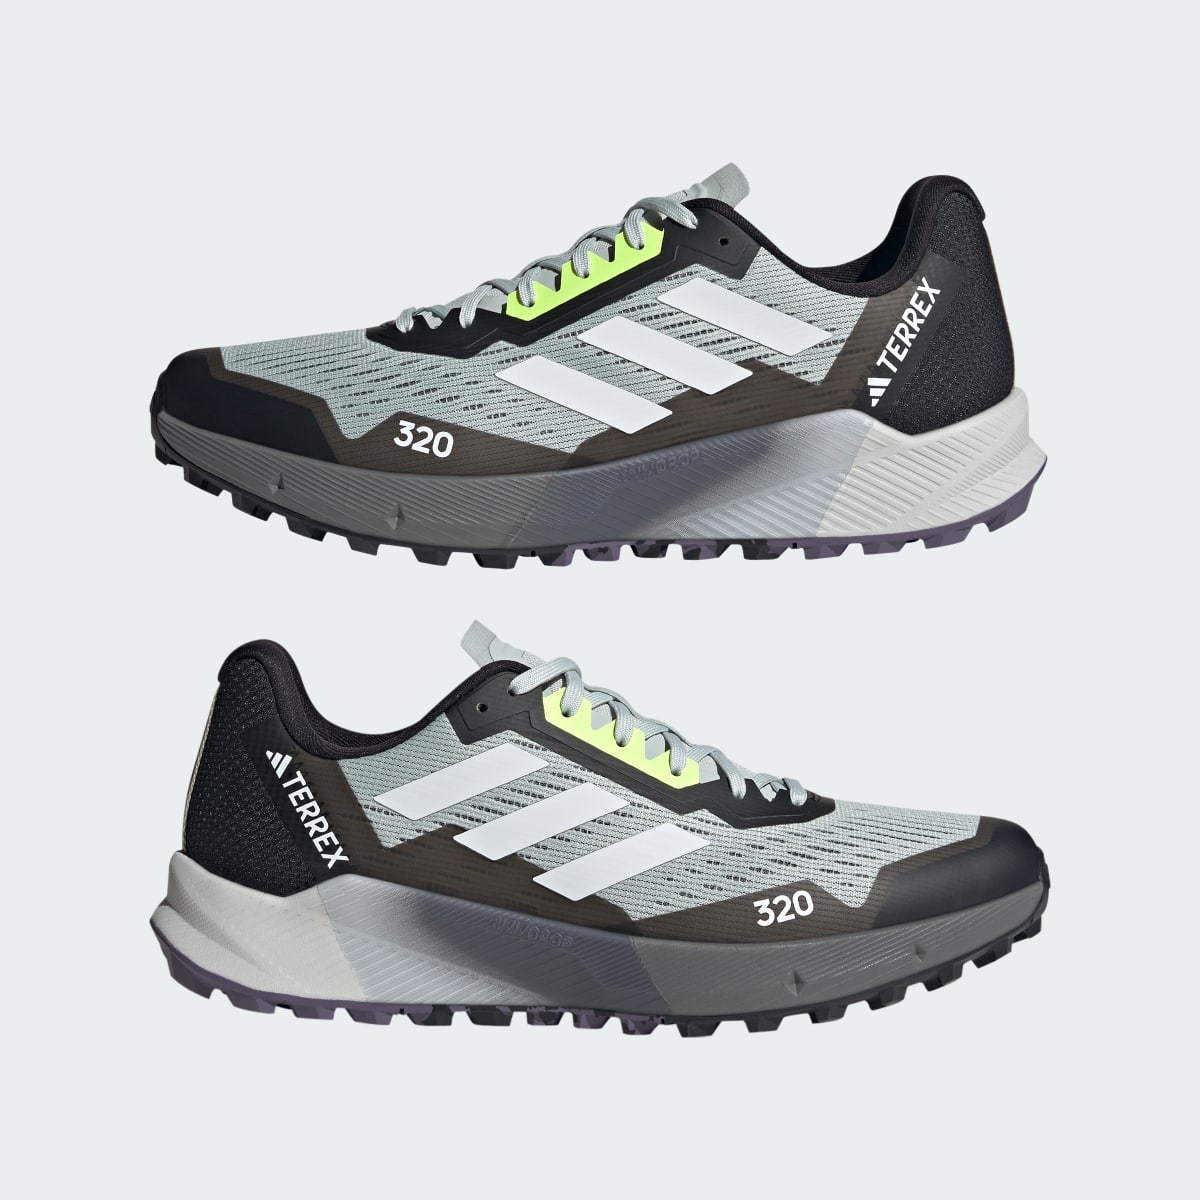 Adidas Terrex Agravic Flow 2.0 Trail Running Shoes. 11